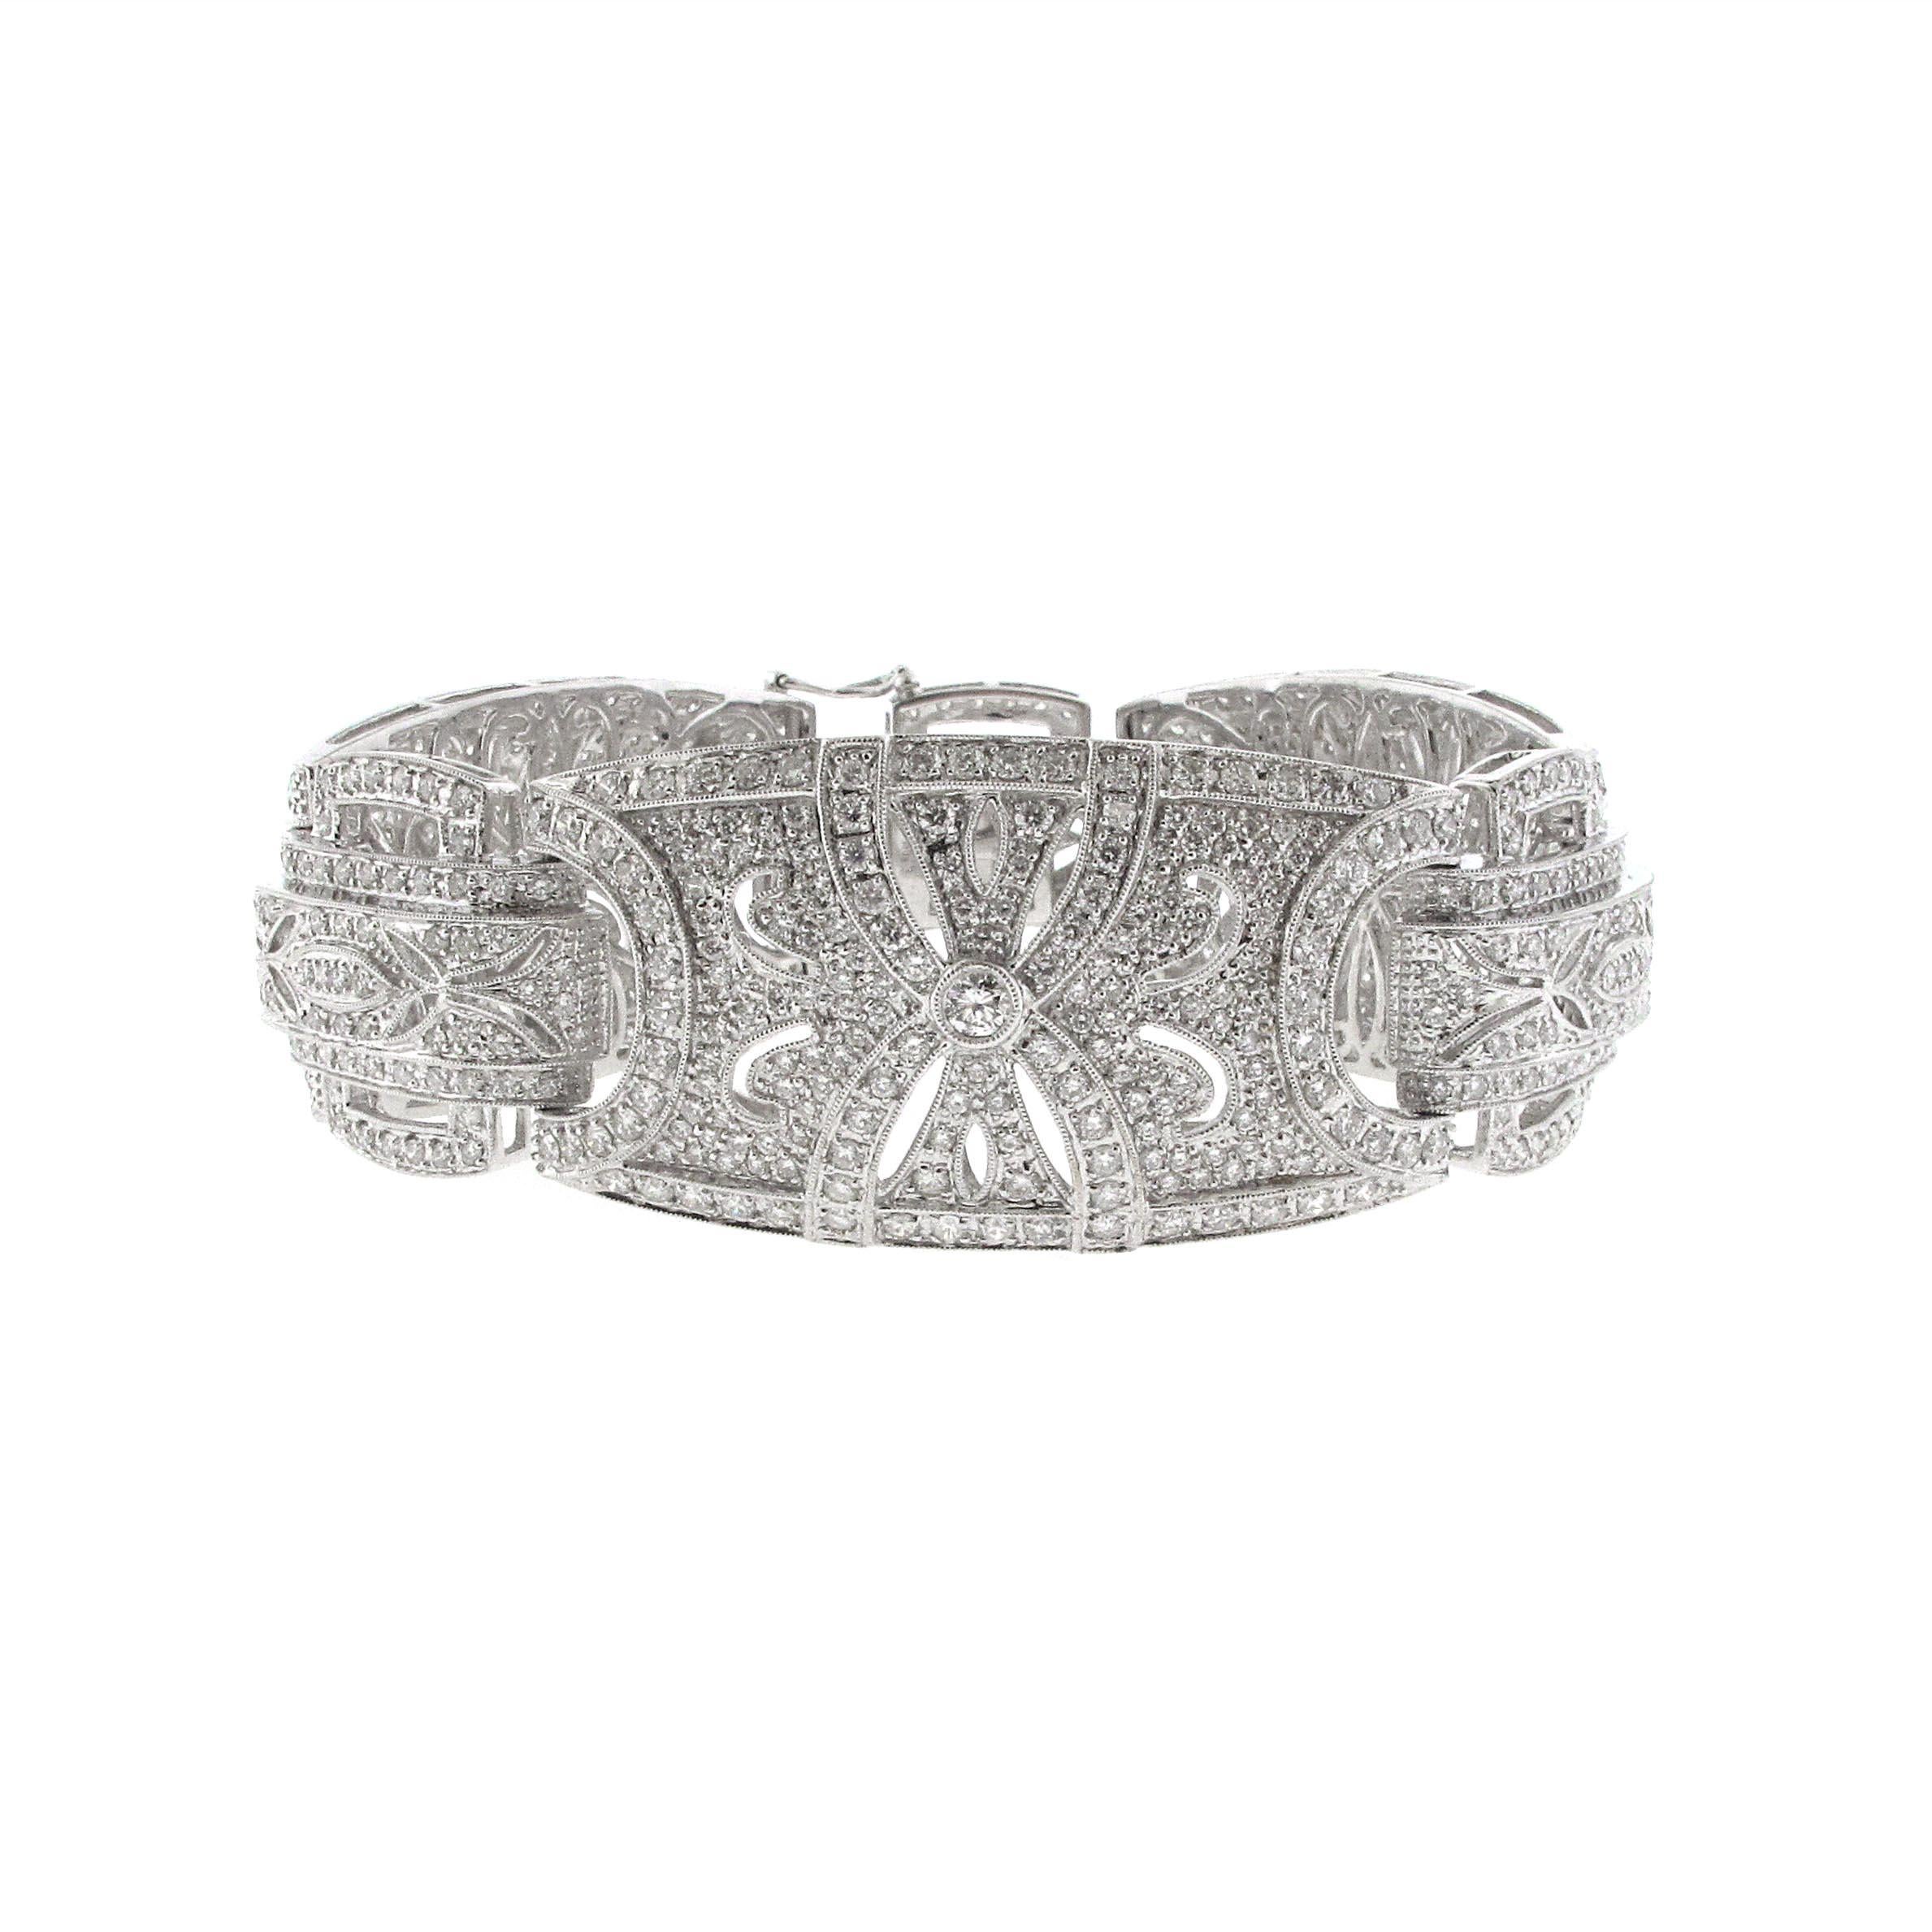 Modern Diamond Bracelet With Over 14 Carats of White Diamonds For Sale